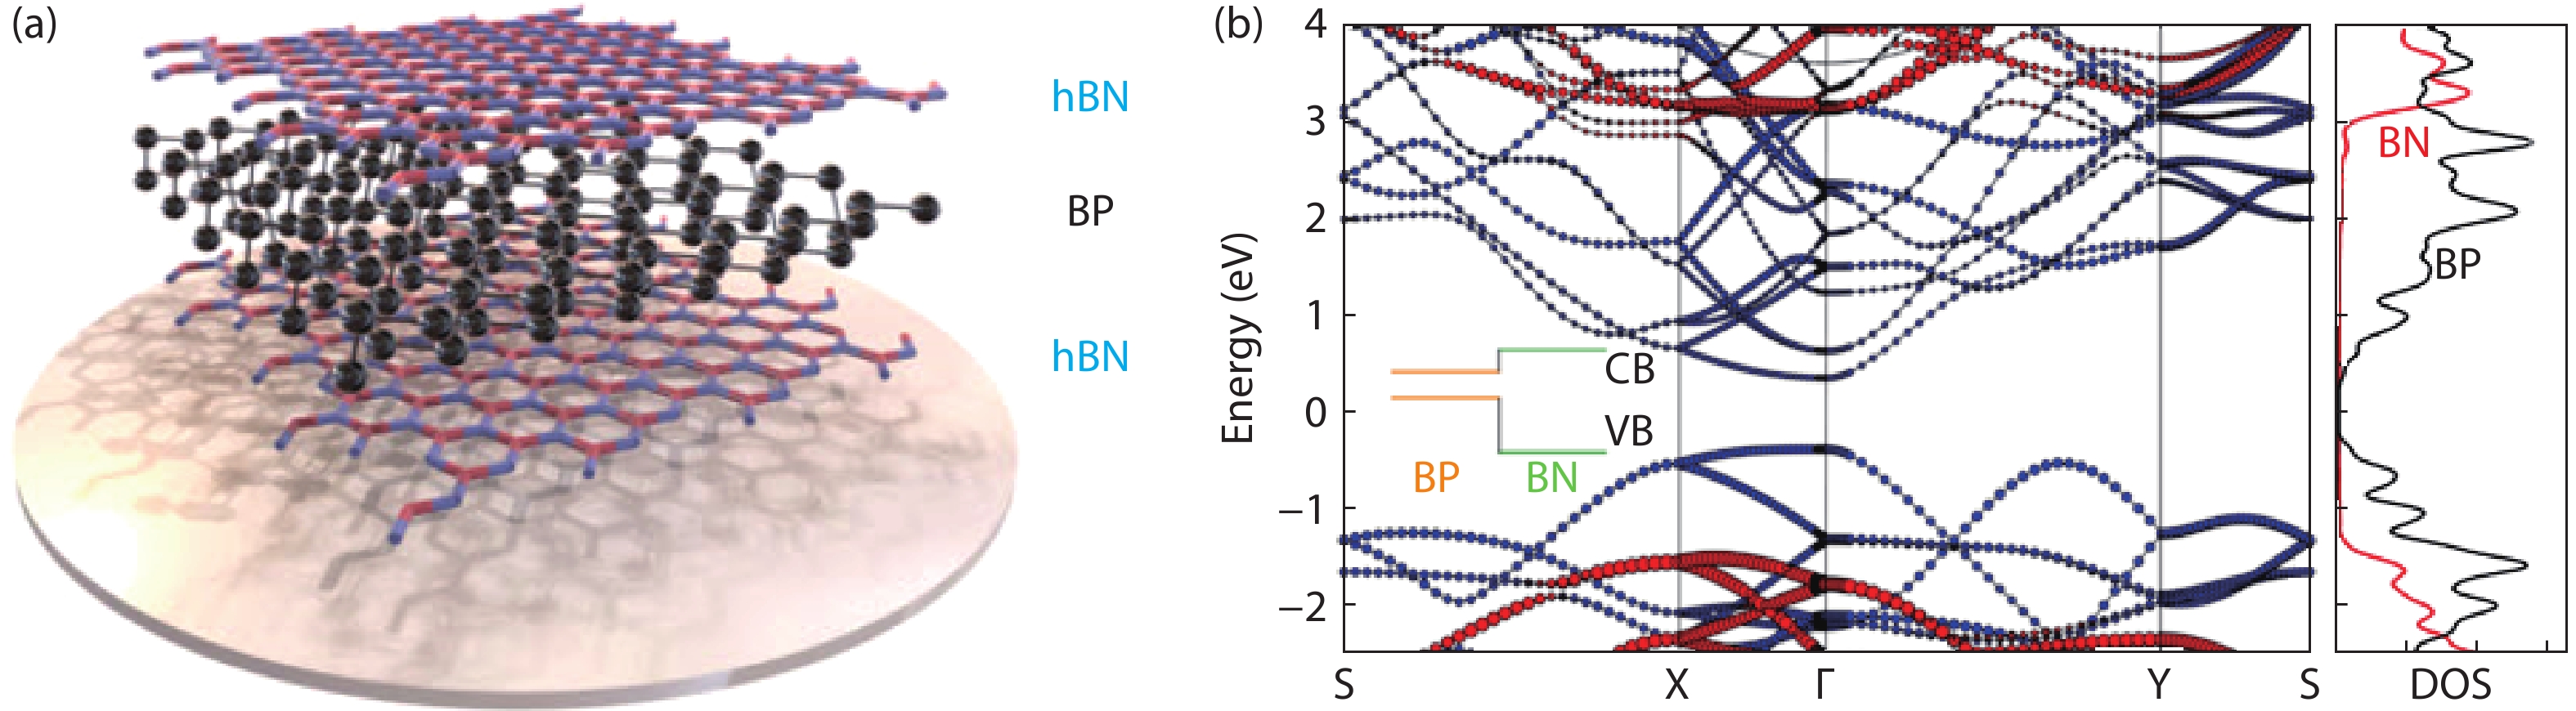 (Color online) Black phosphorus sandwich structure integration with hBN and its band structure. (a) A 3D schematic of hBN/BP/hBN heterostructure. (b) The HSE06 calculation results of the band structure and the local density of states (LDOS) for the hBN/BP heterostructure. Modified with permission from Ref. [38] Copyright 2016 American Chemical Society, (b) Ref. [39] Copyright 2015 American Chemical Society.